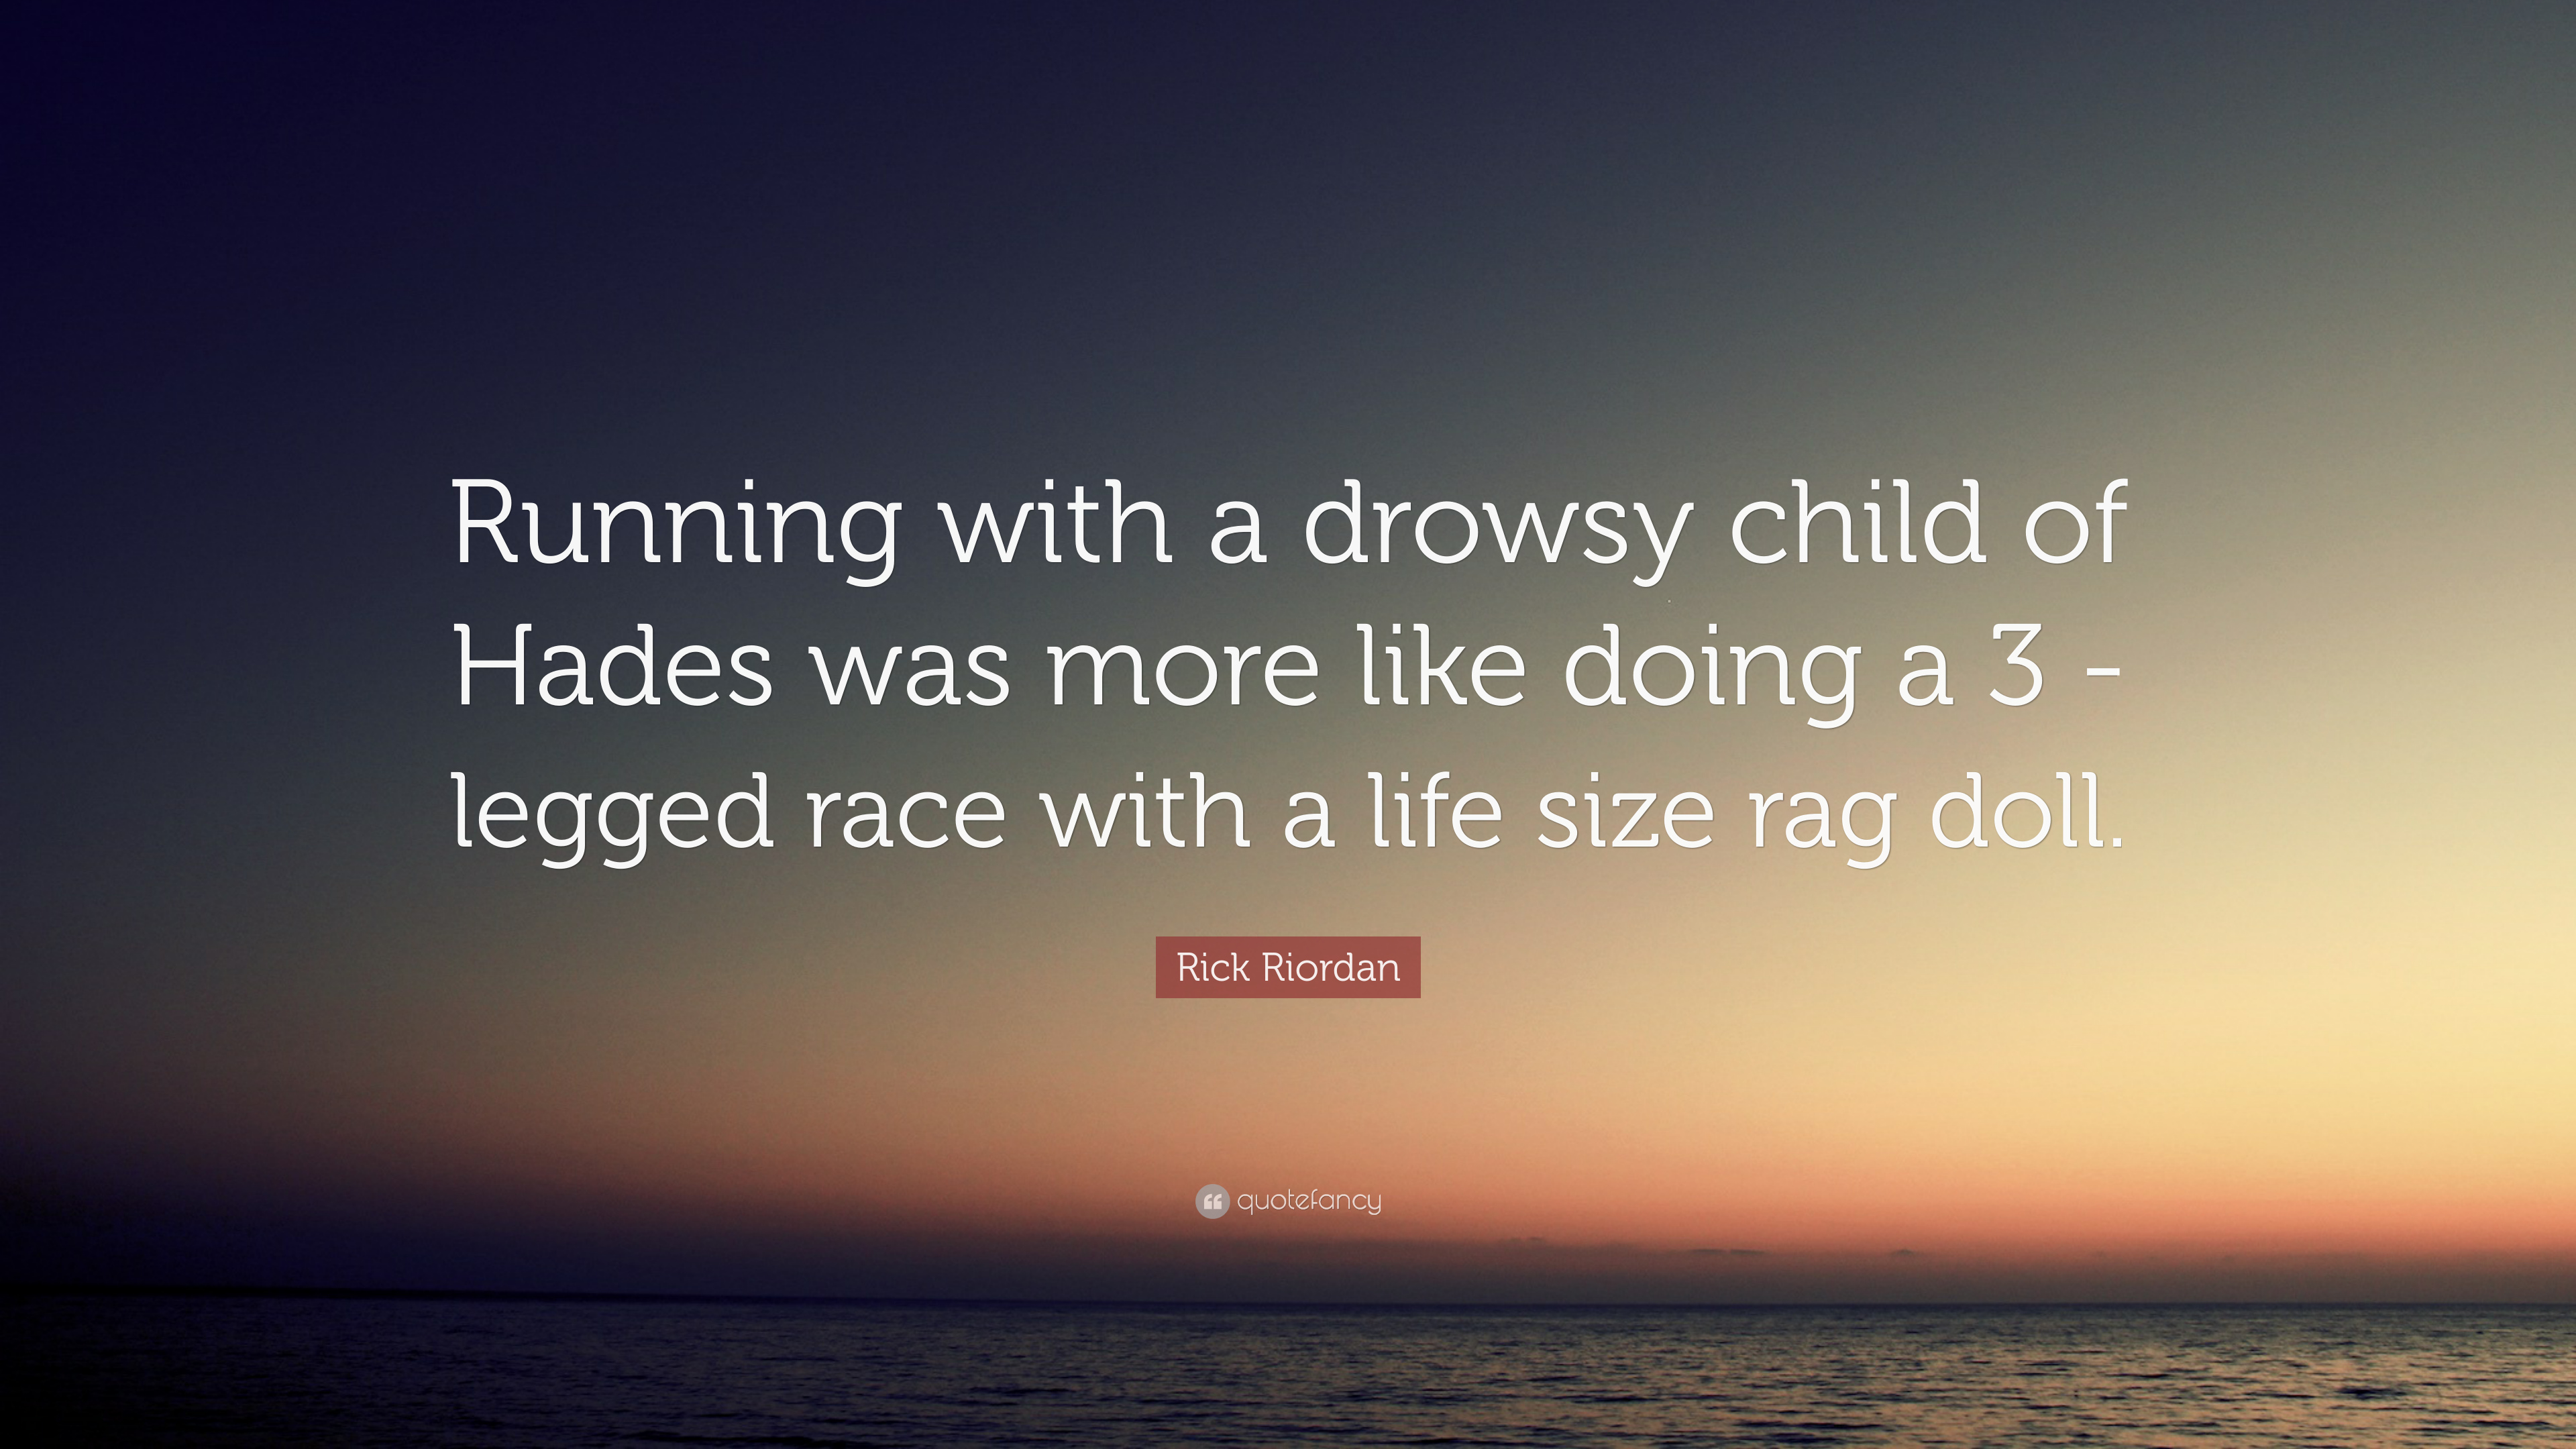 Rick Riordan Quote: “Running with a drowsy child of Hades